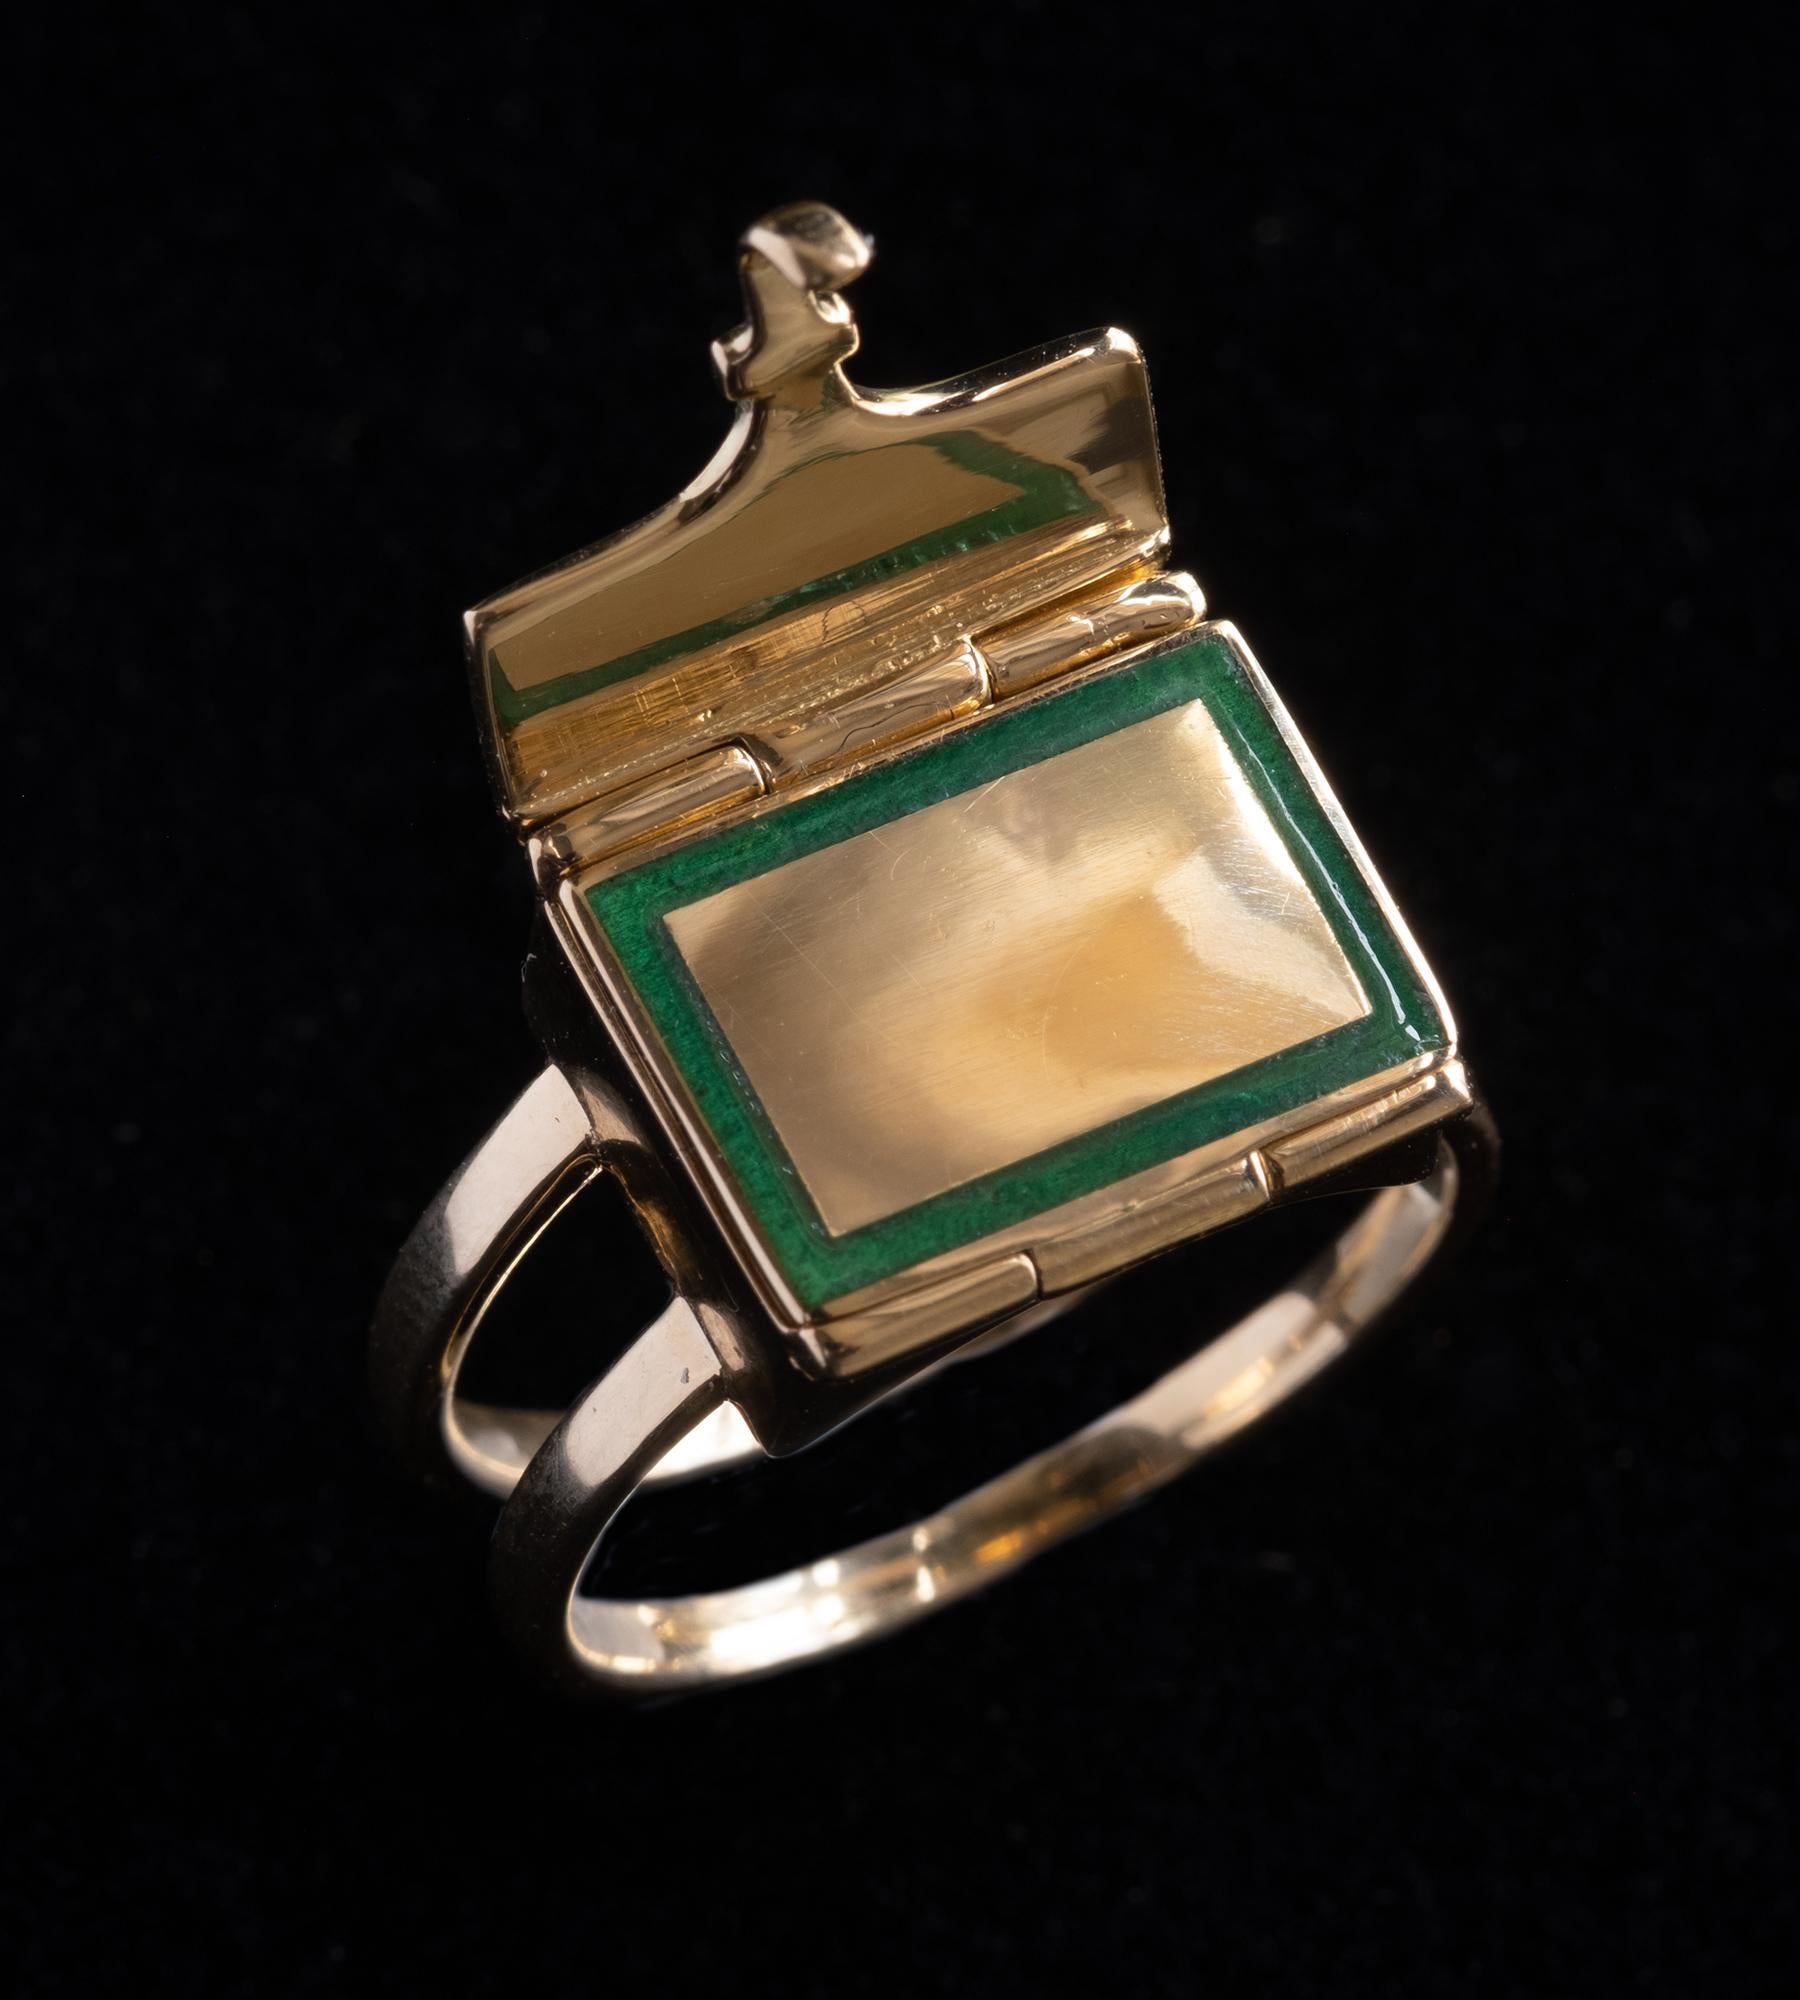 Regency The Fleur Fairfax Book Ring in 18ct Gold and Enamel - Serpentine Green US 7 For Sale